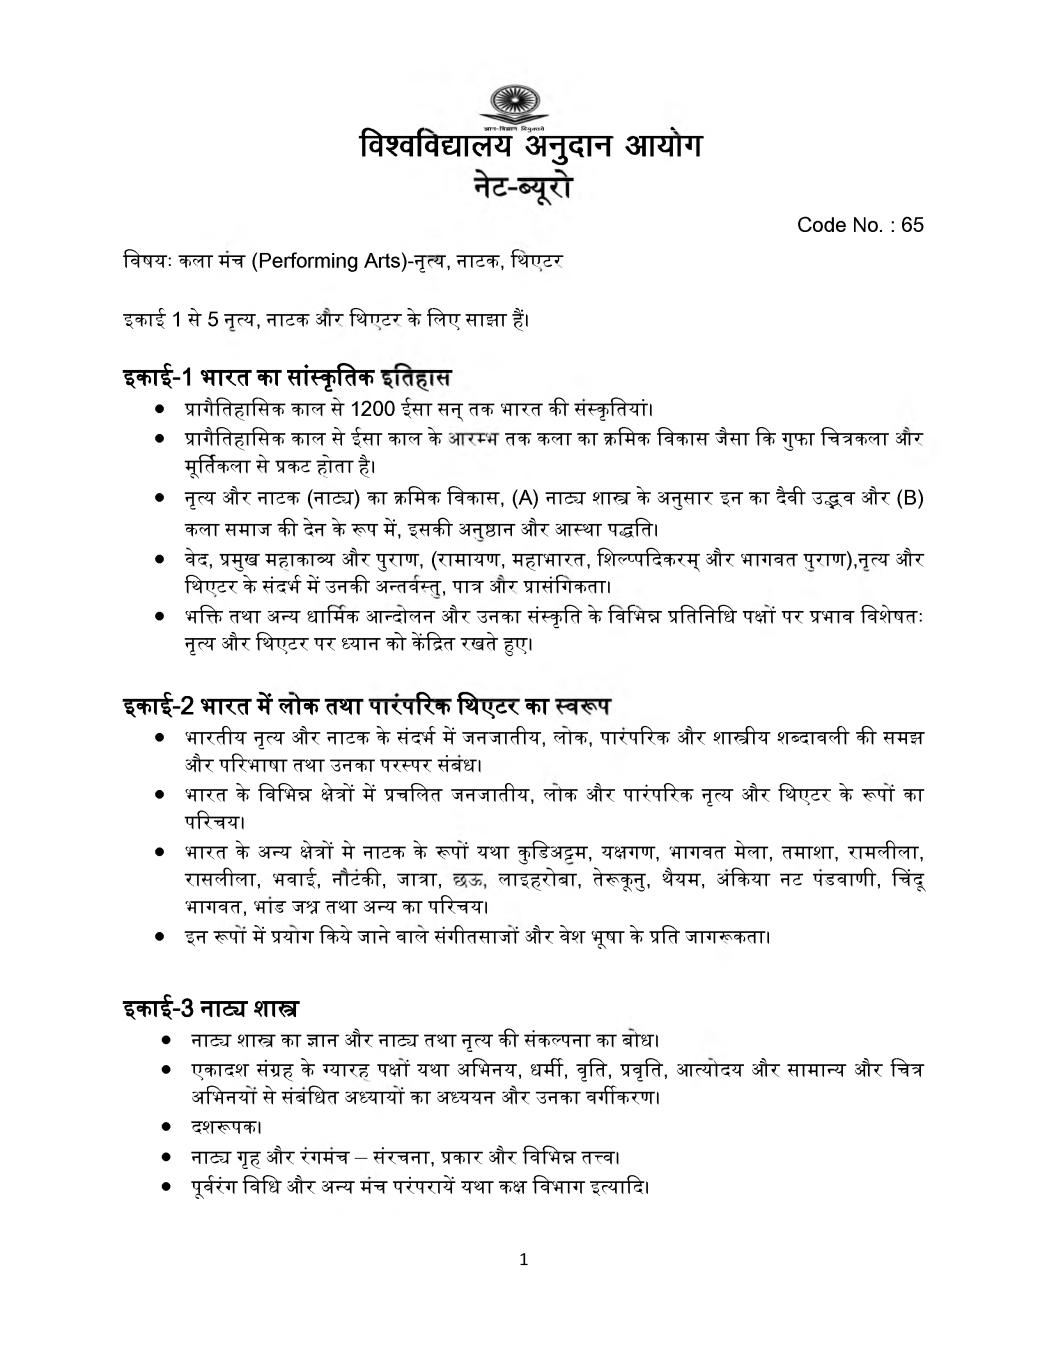 UGC NET Syllabus for Performing Art - Dance  Drama  Theatre 2020 in Hindi - Page 1